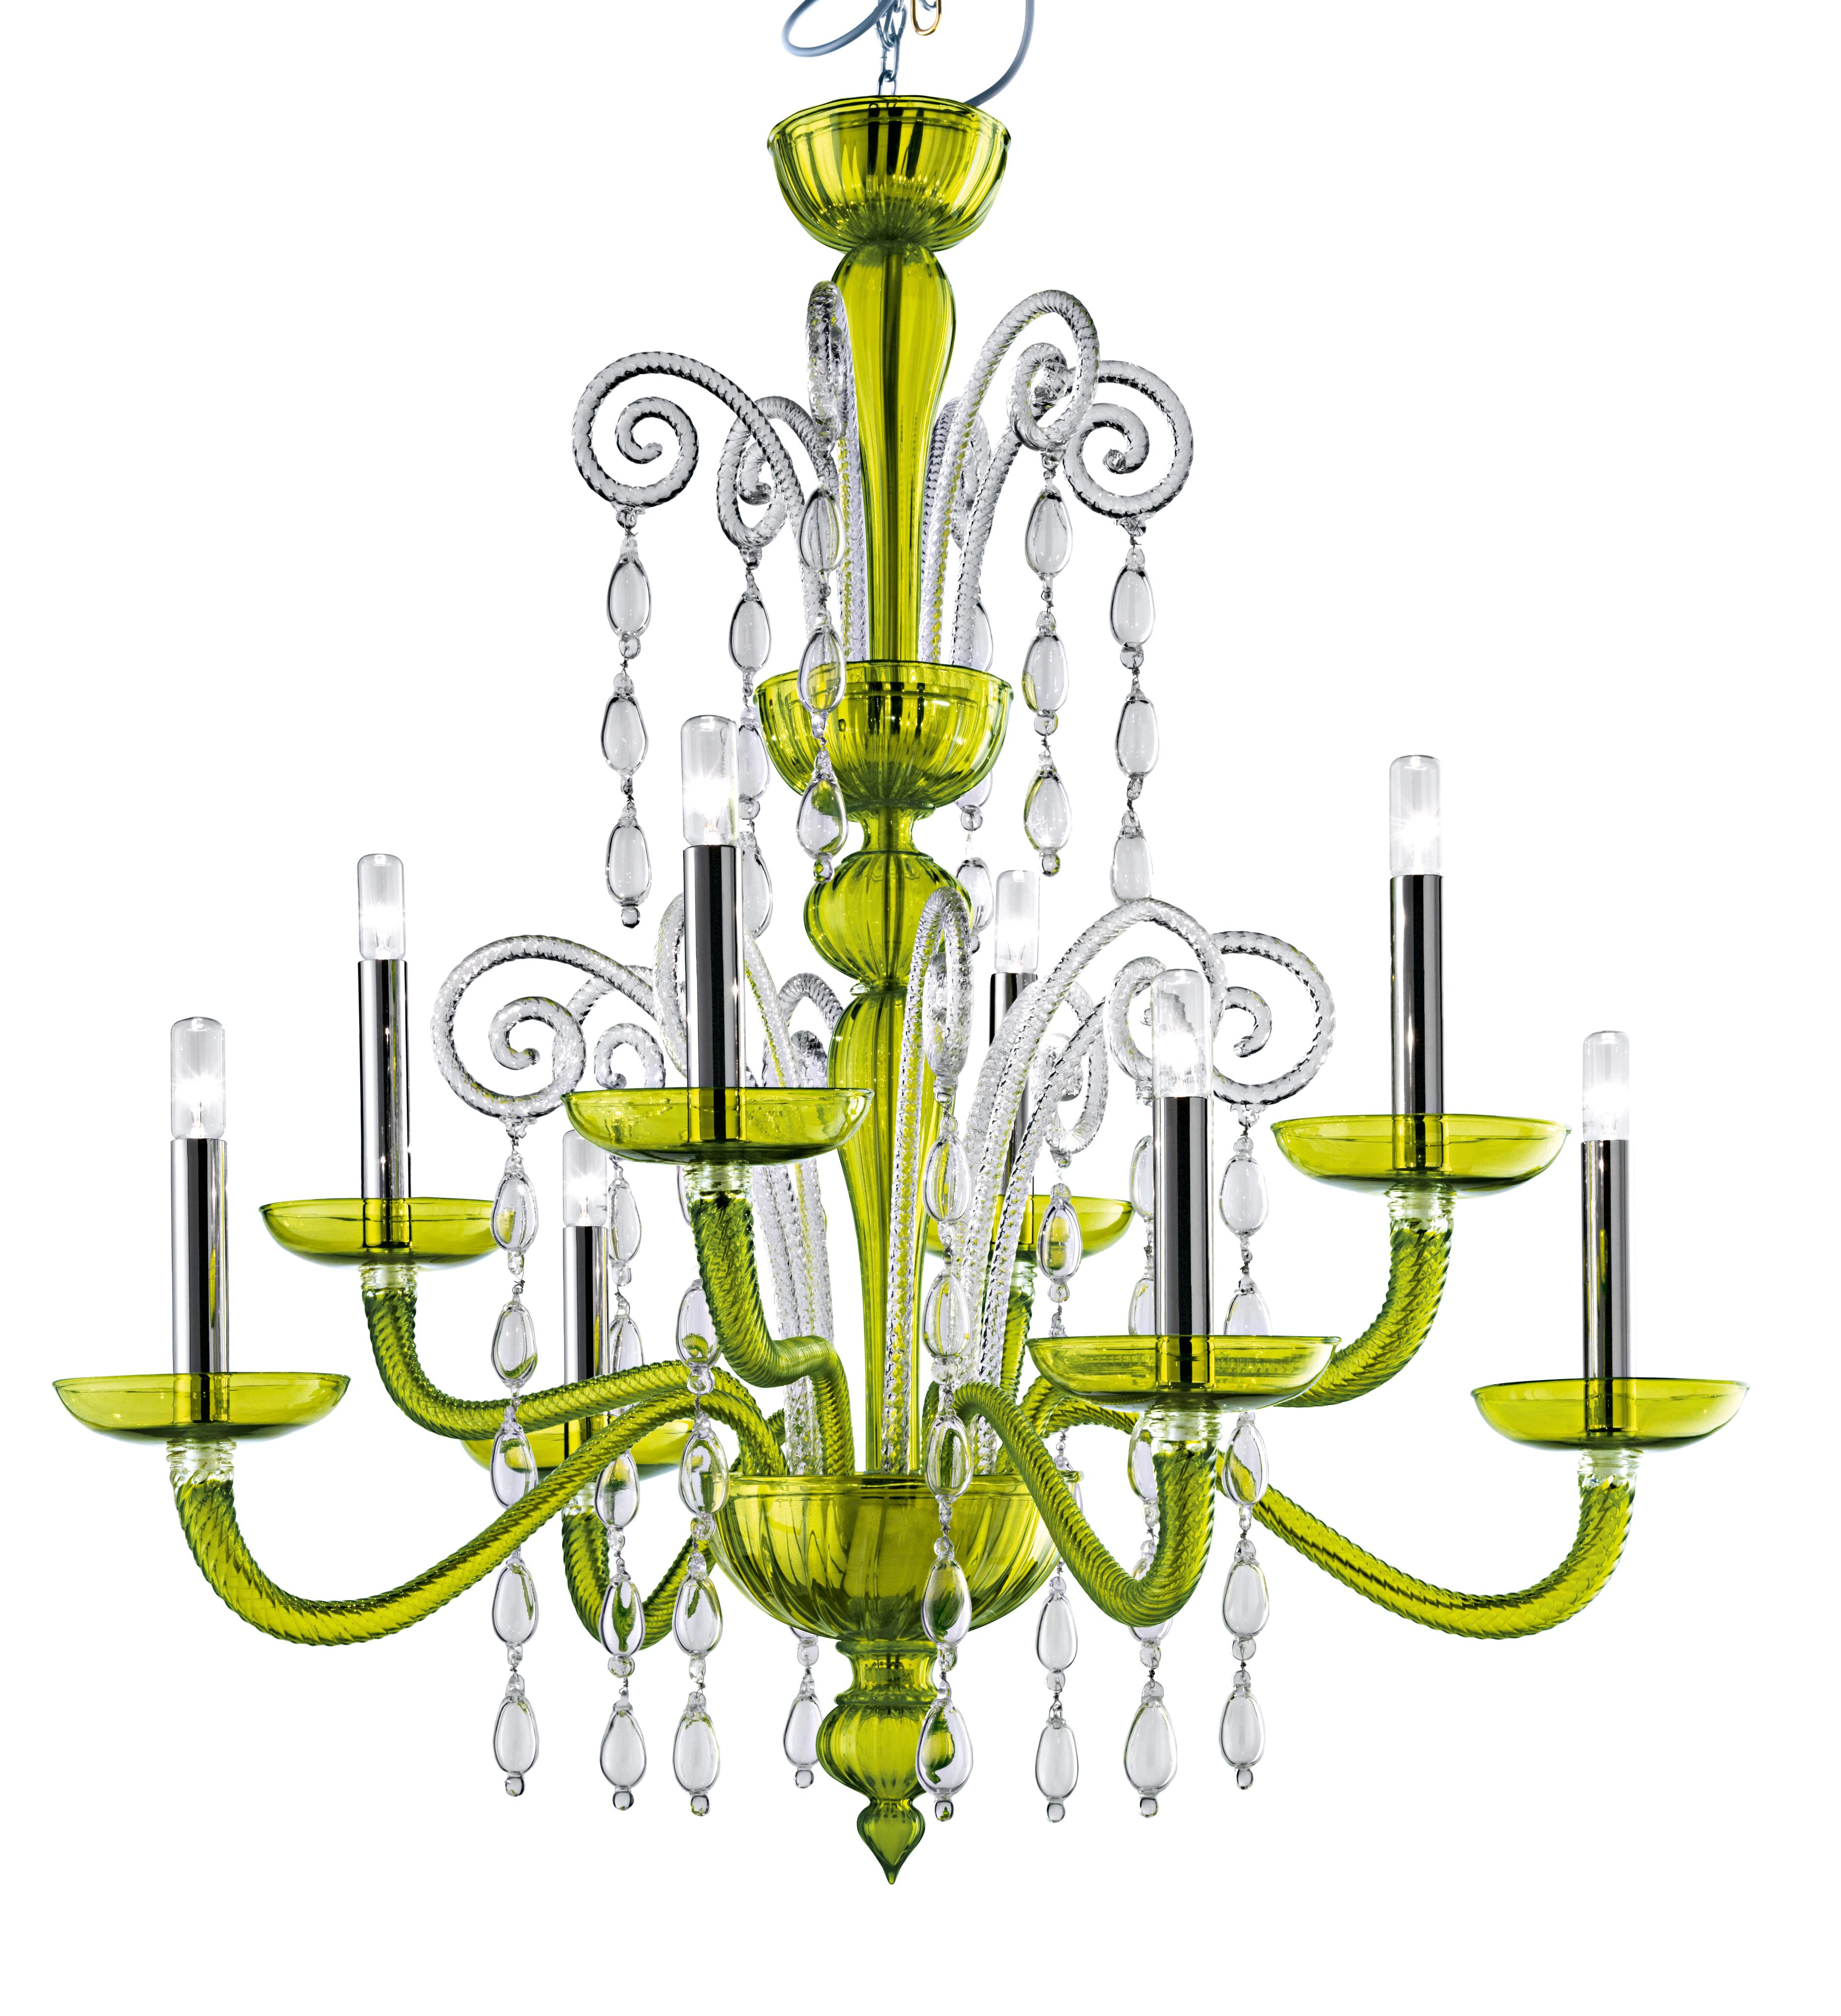 Green (Liquid Green_VL) Taymyr 5589 08 Chandelier in Glass with Polished Chrome Finish, by Barovier